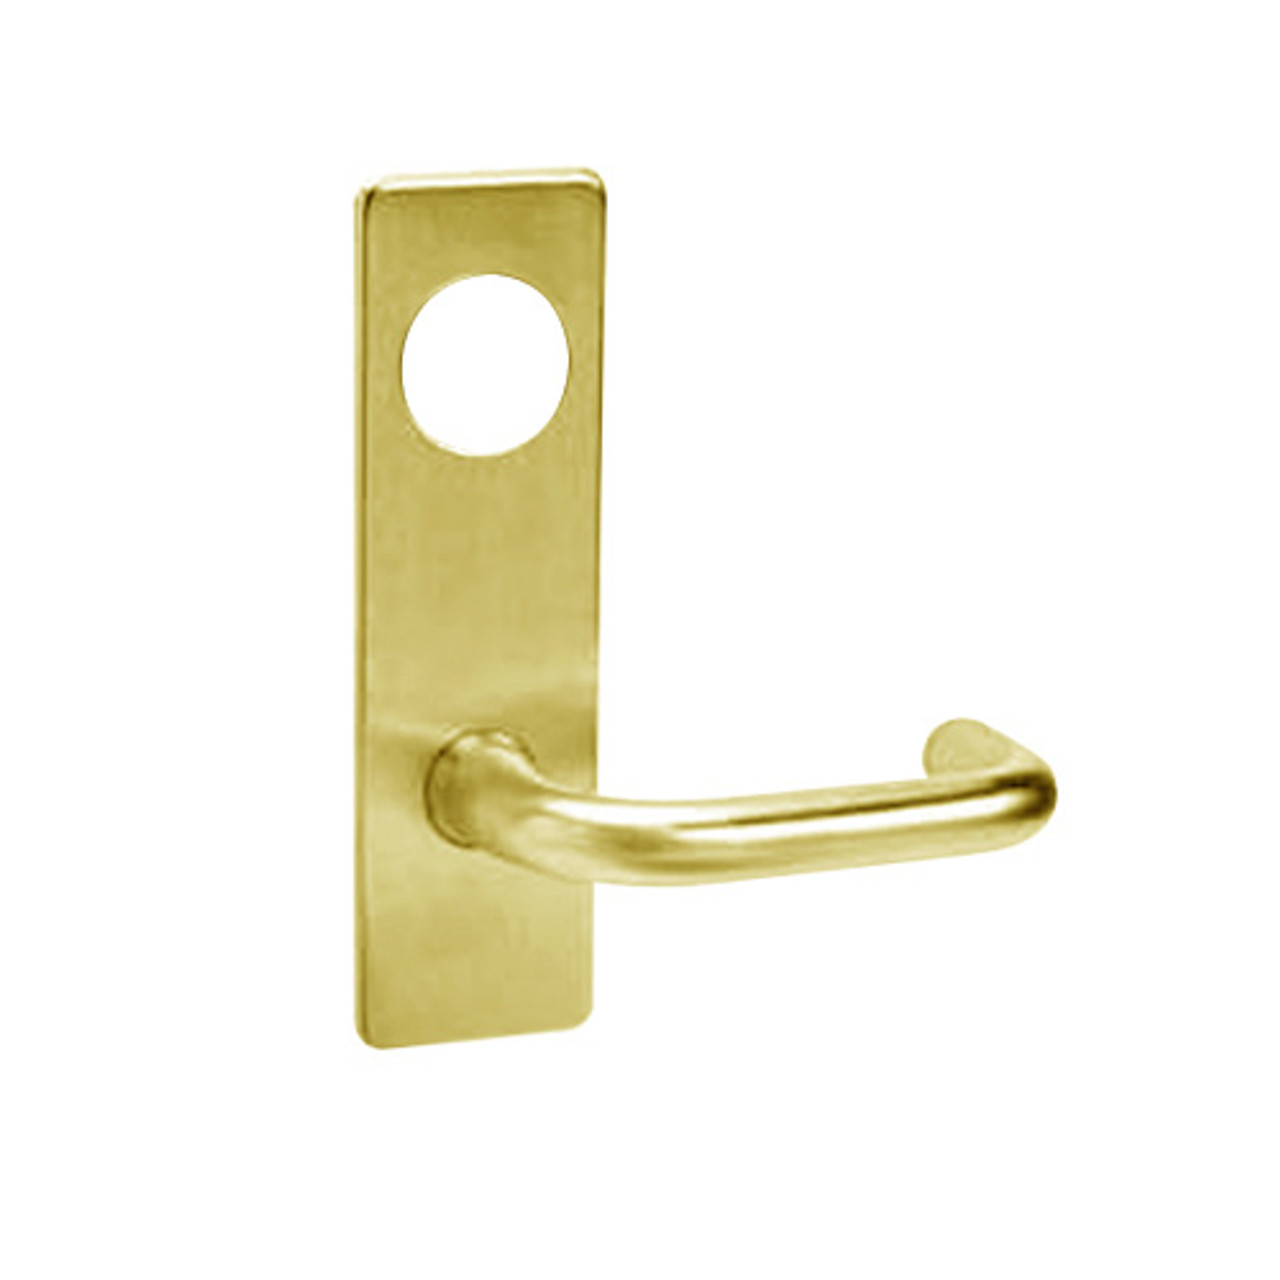 ML2048-LSR-605-CL6 Corbin Russwin ML2000 Series IC 6-Pin Less Core Mortise Entrance Locksets with Lustra Lever in Bright Brass